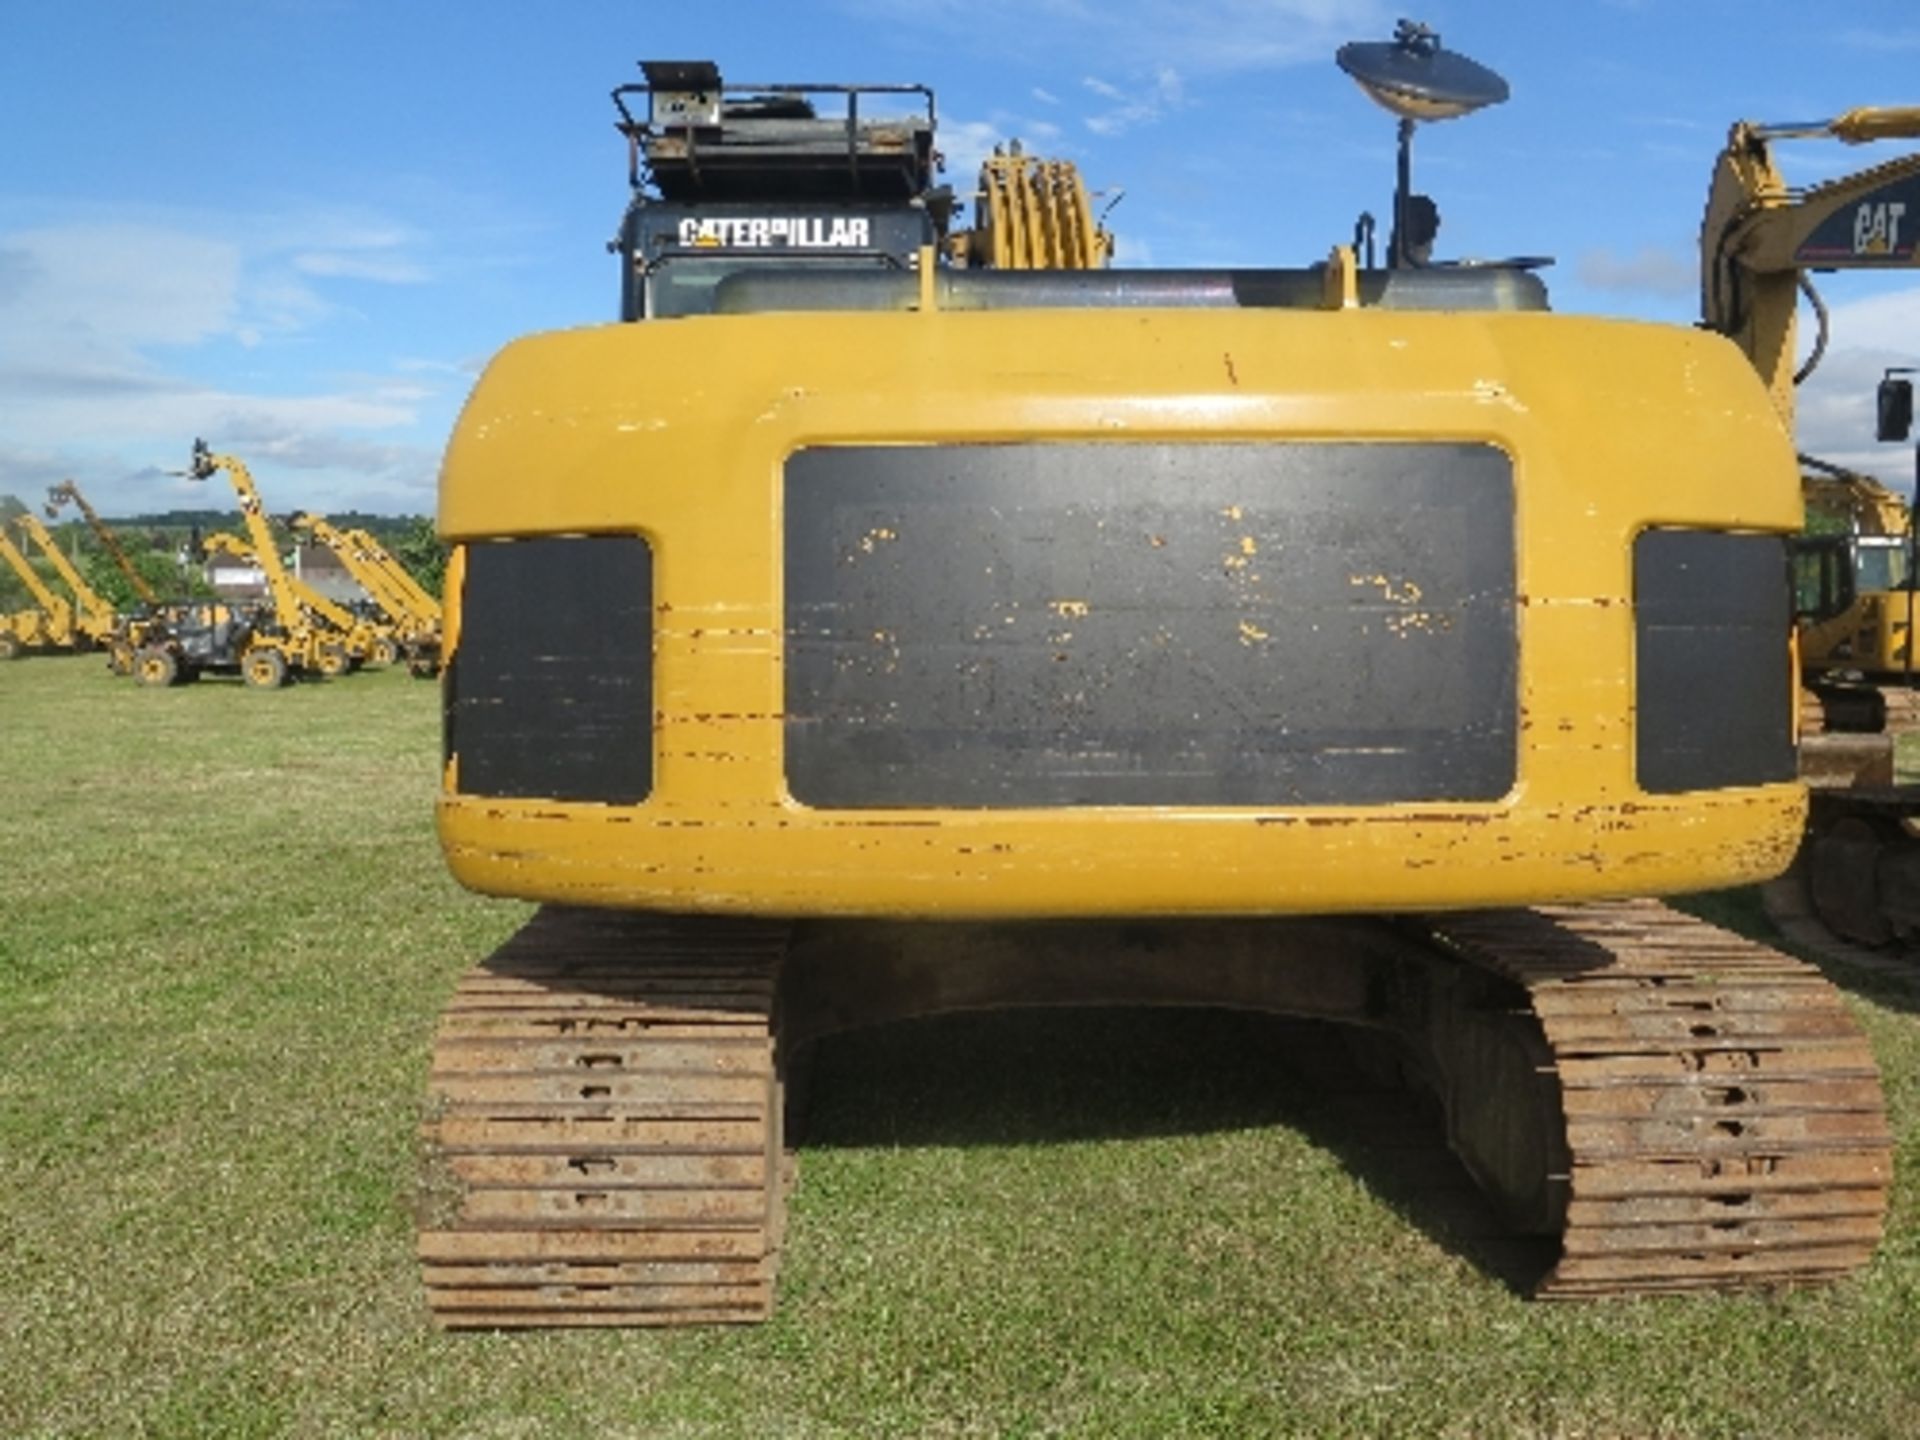 Caterpillar 320DL excavator 2623 hrs 2007 149613ALL LOTS are SOLD AS SEEN WITHOUT WARRANTY - Image 2 of 8